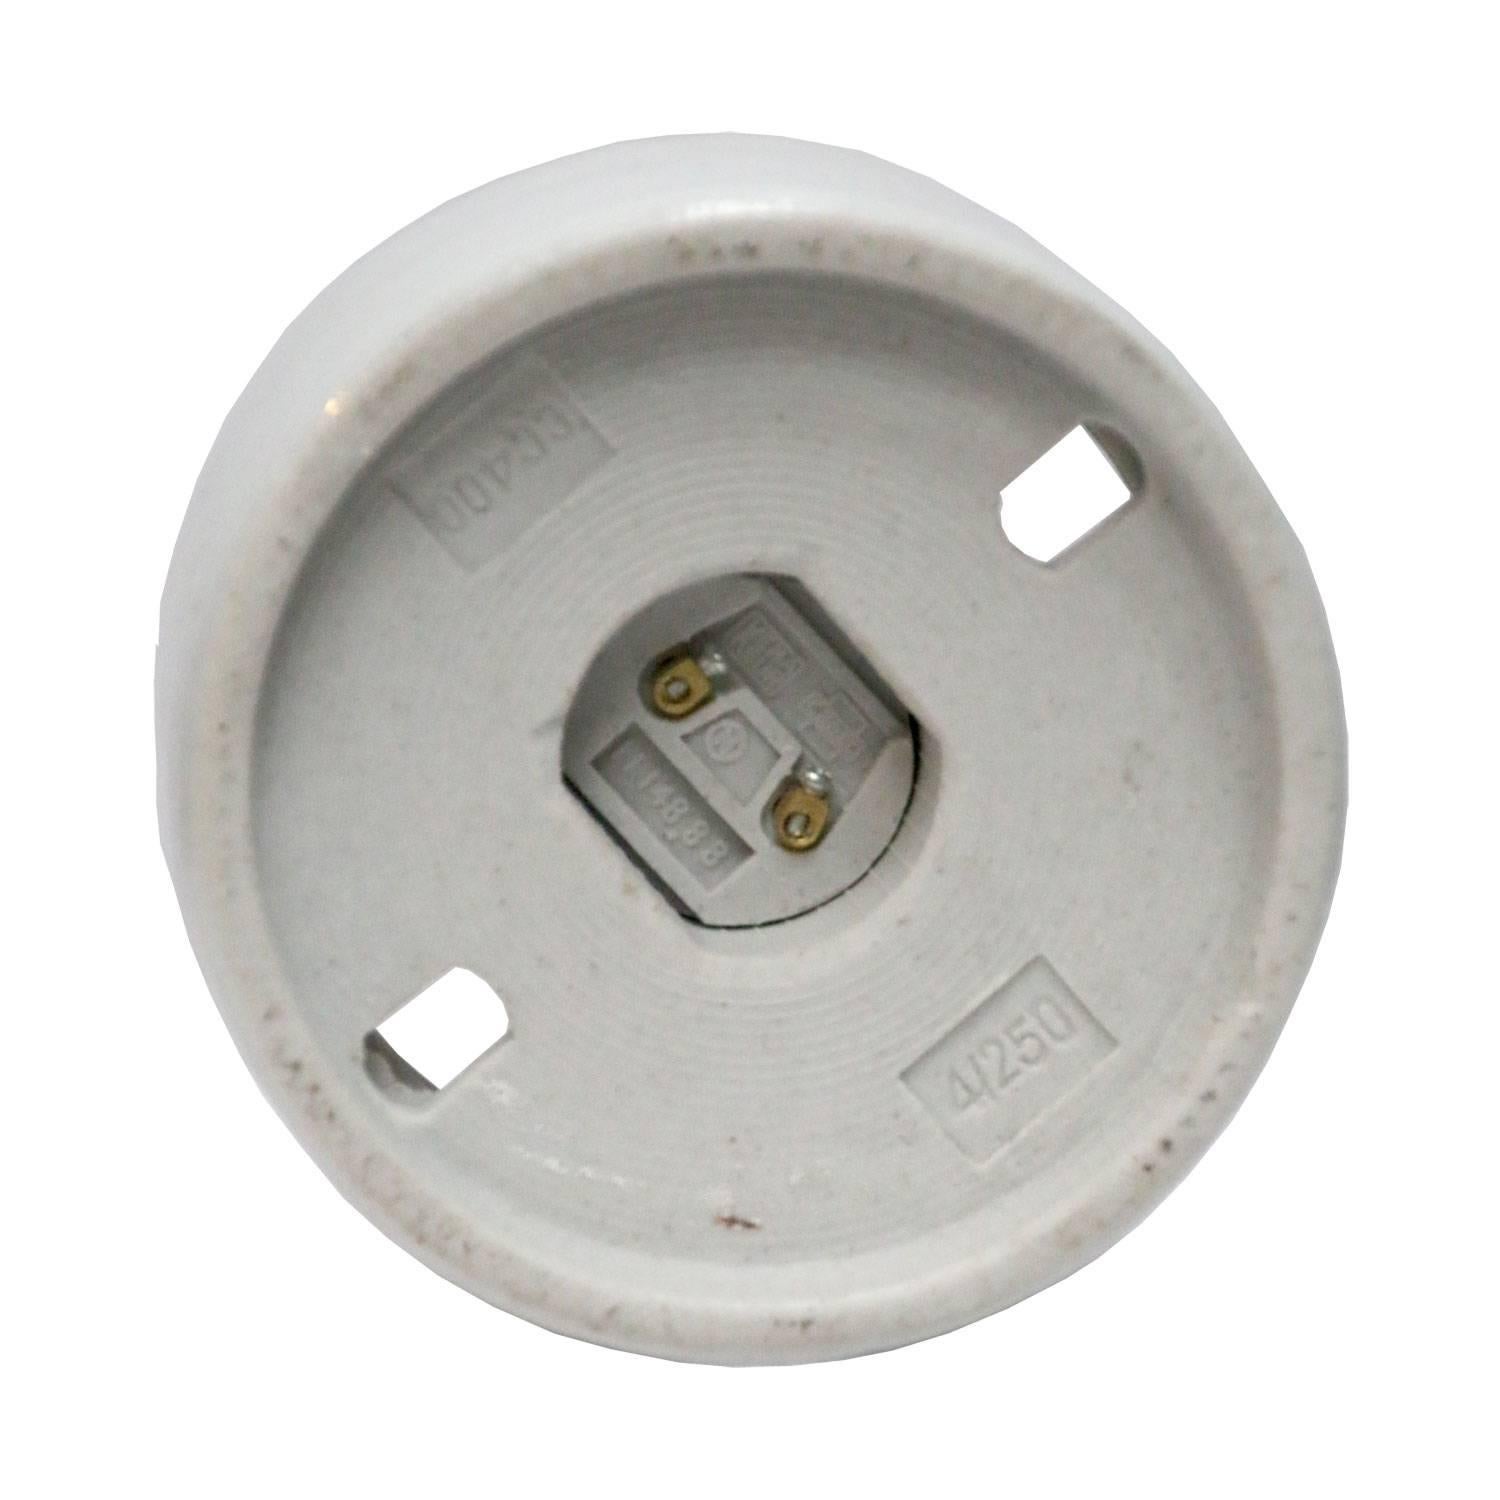 Industrial wall / ceiling / flush mount lamp. White porcelain. Clear glass.

2 conductors, no ground.
Measures: Diameter foot 10 cm
Suitable for 110 volt USA
new wiring is CE certified (220 volt)  or UL Listed (110 volt) 

Weight: 0.8 kg / 1.8